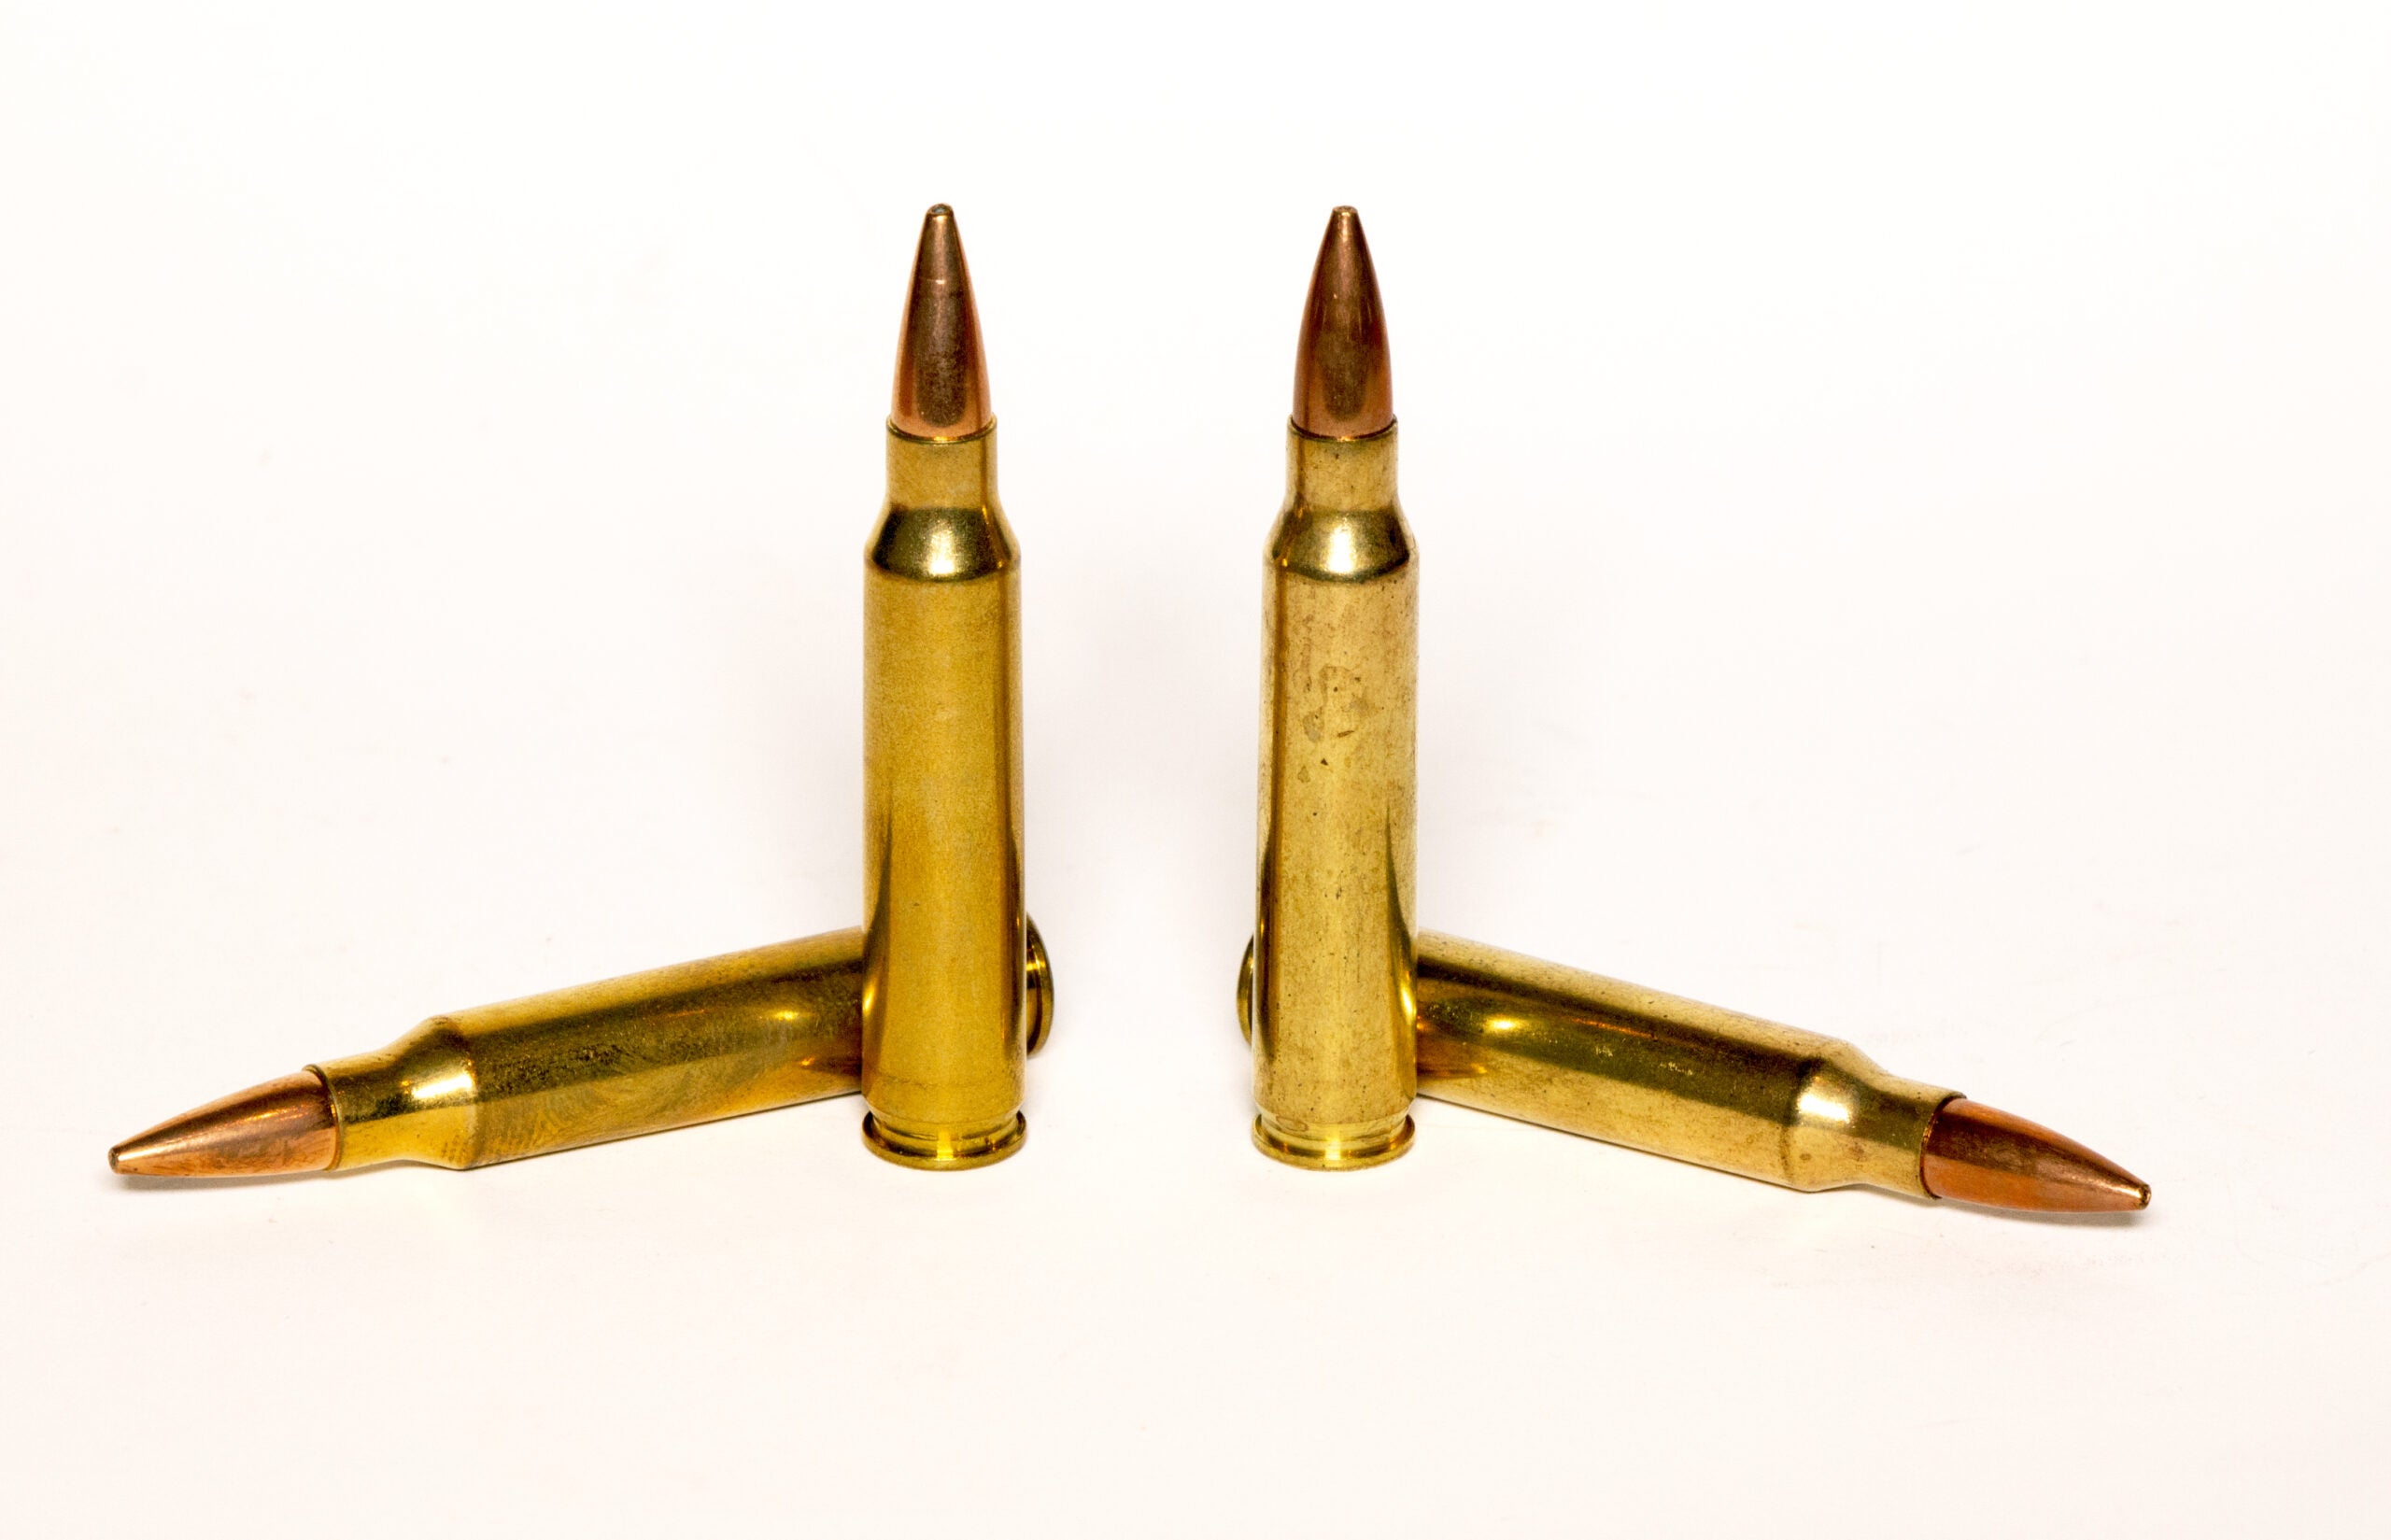 Two 556 cartridges on the left, standing next to two 223 cartridges on the right.